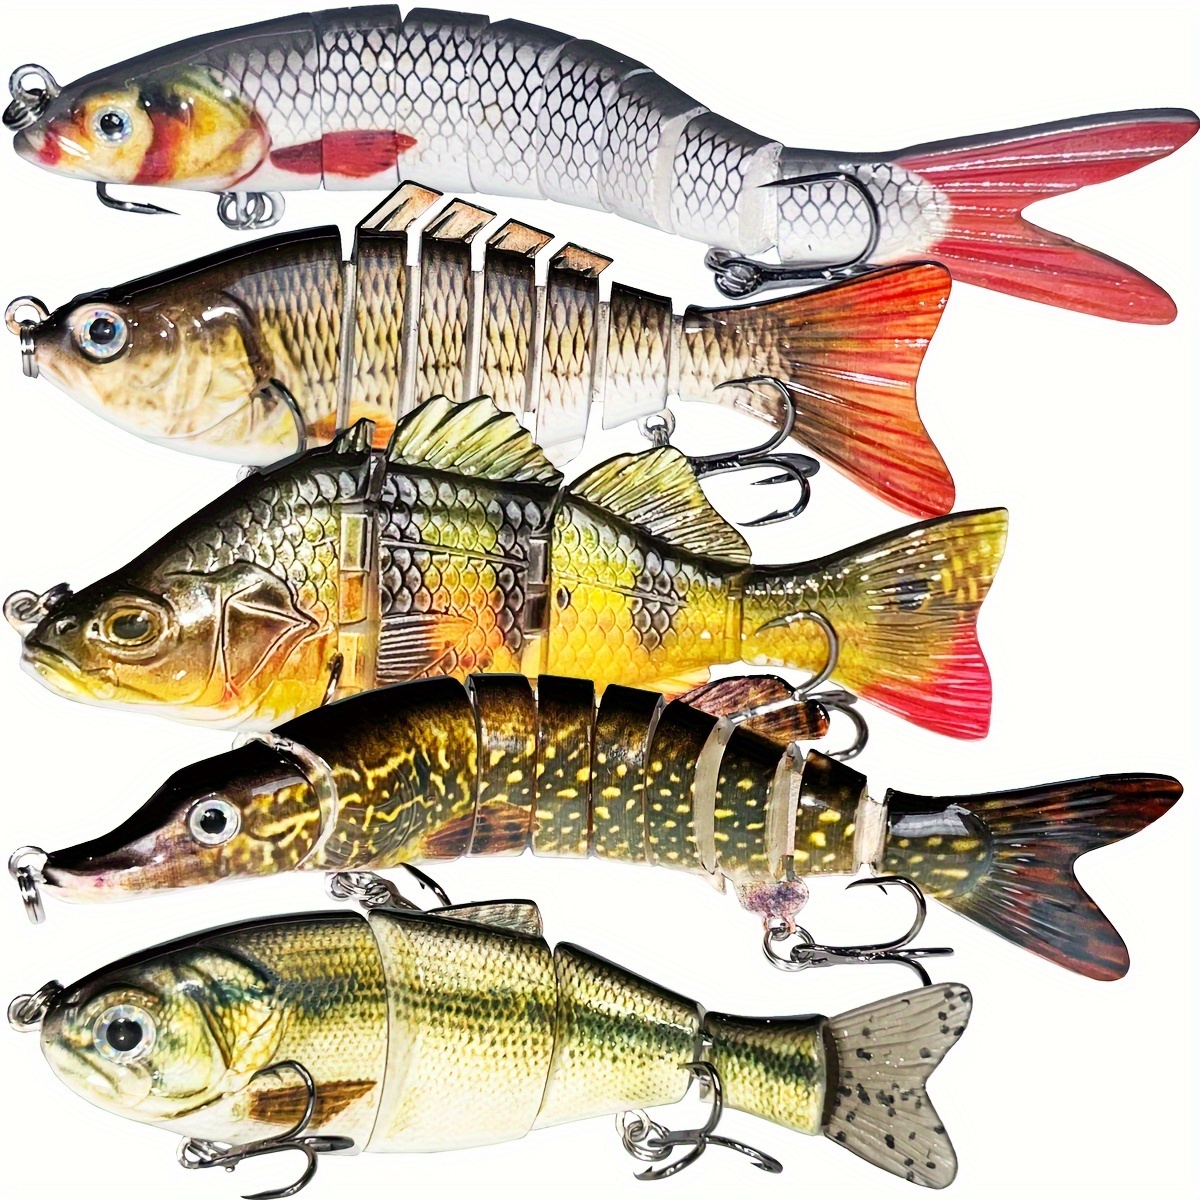 

1pc Fishing Lures For Bass Trout, Multi Jointed Swimbaits, Slow Sinking Bionic Lures For Freshwater Saltwater